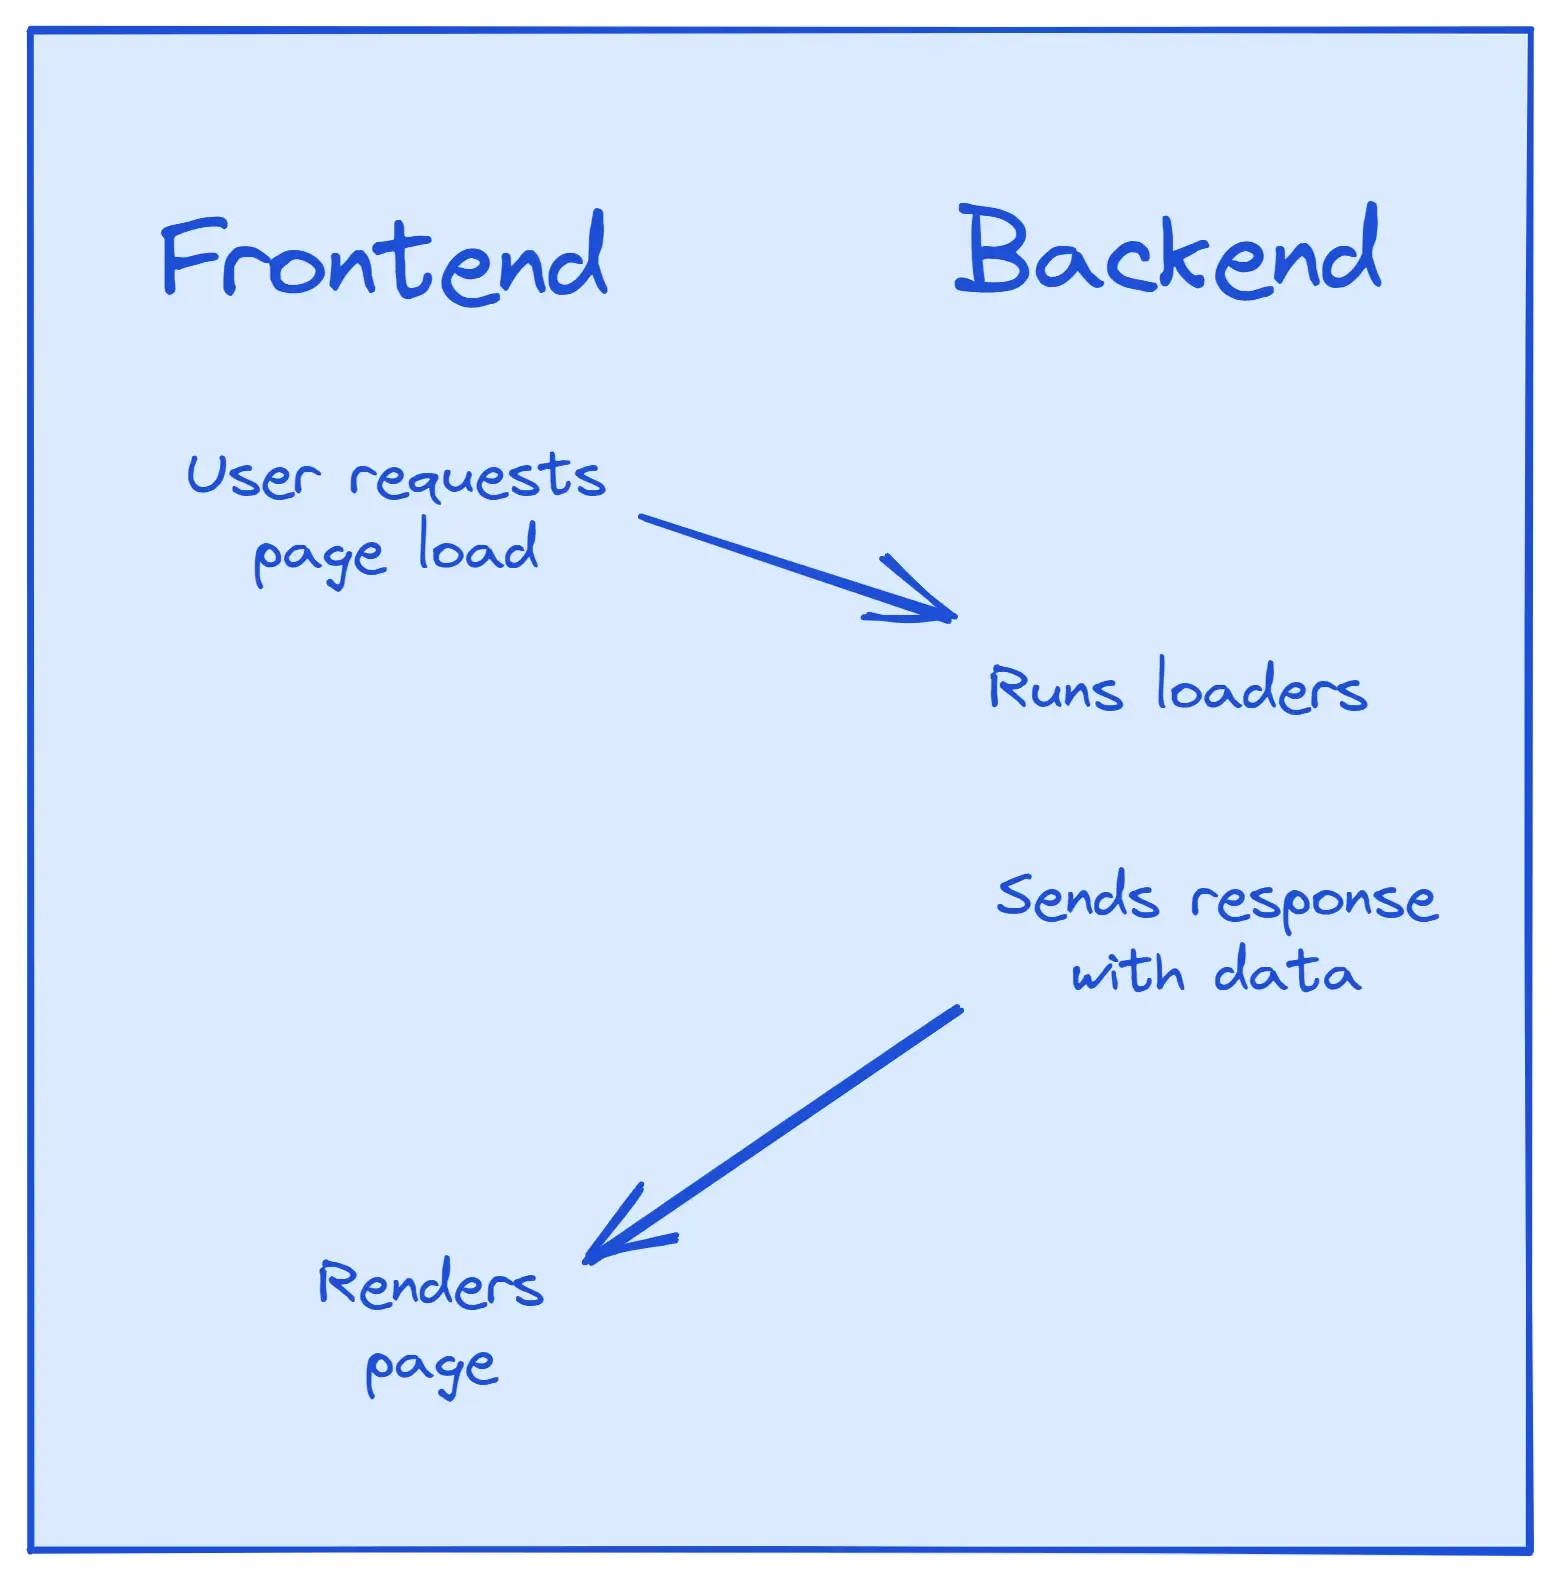 Diagram showing the workflow of a loader. After the user makes requests a page load, the backend runs the loader before sending the response with the loader data